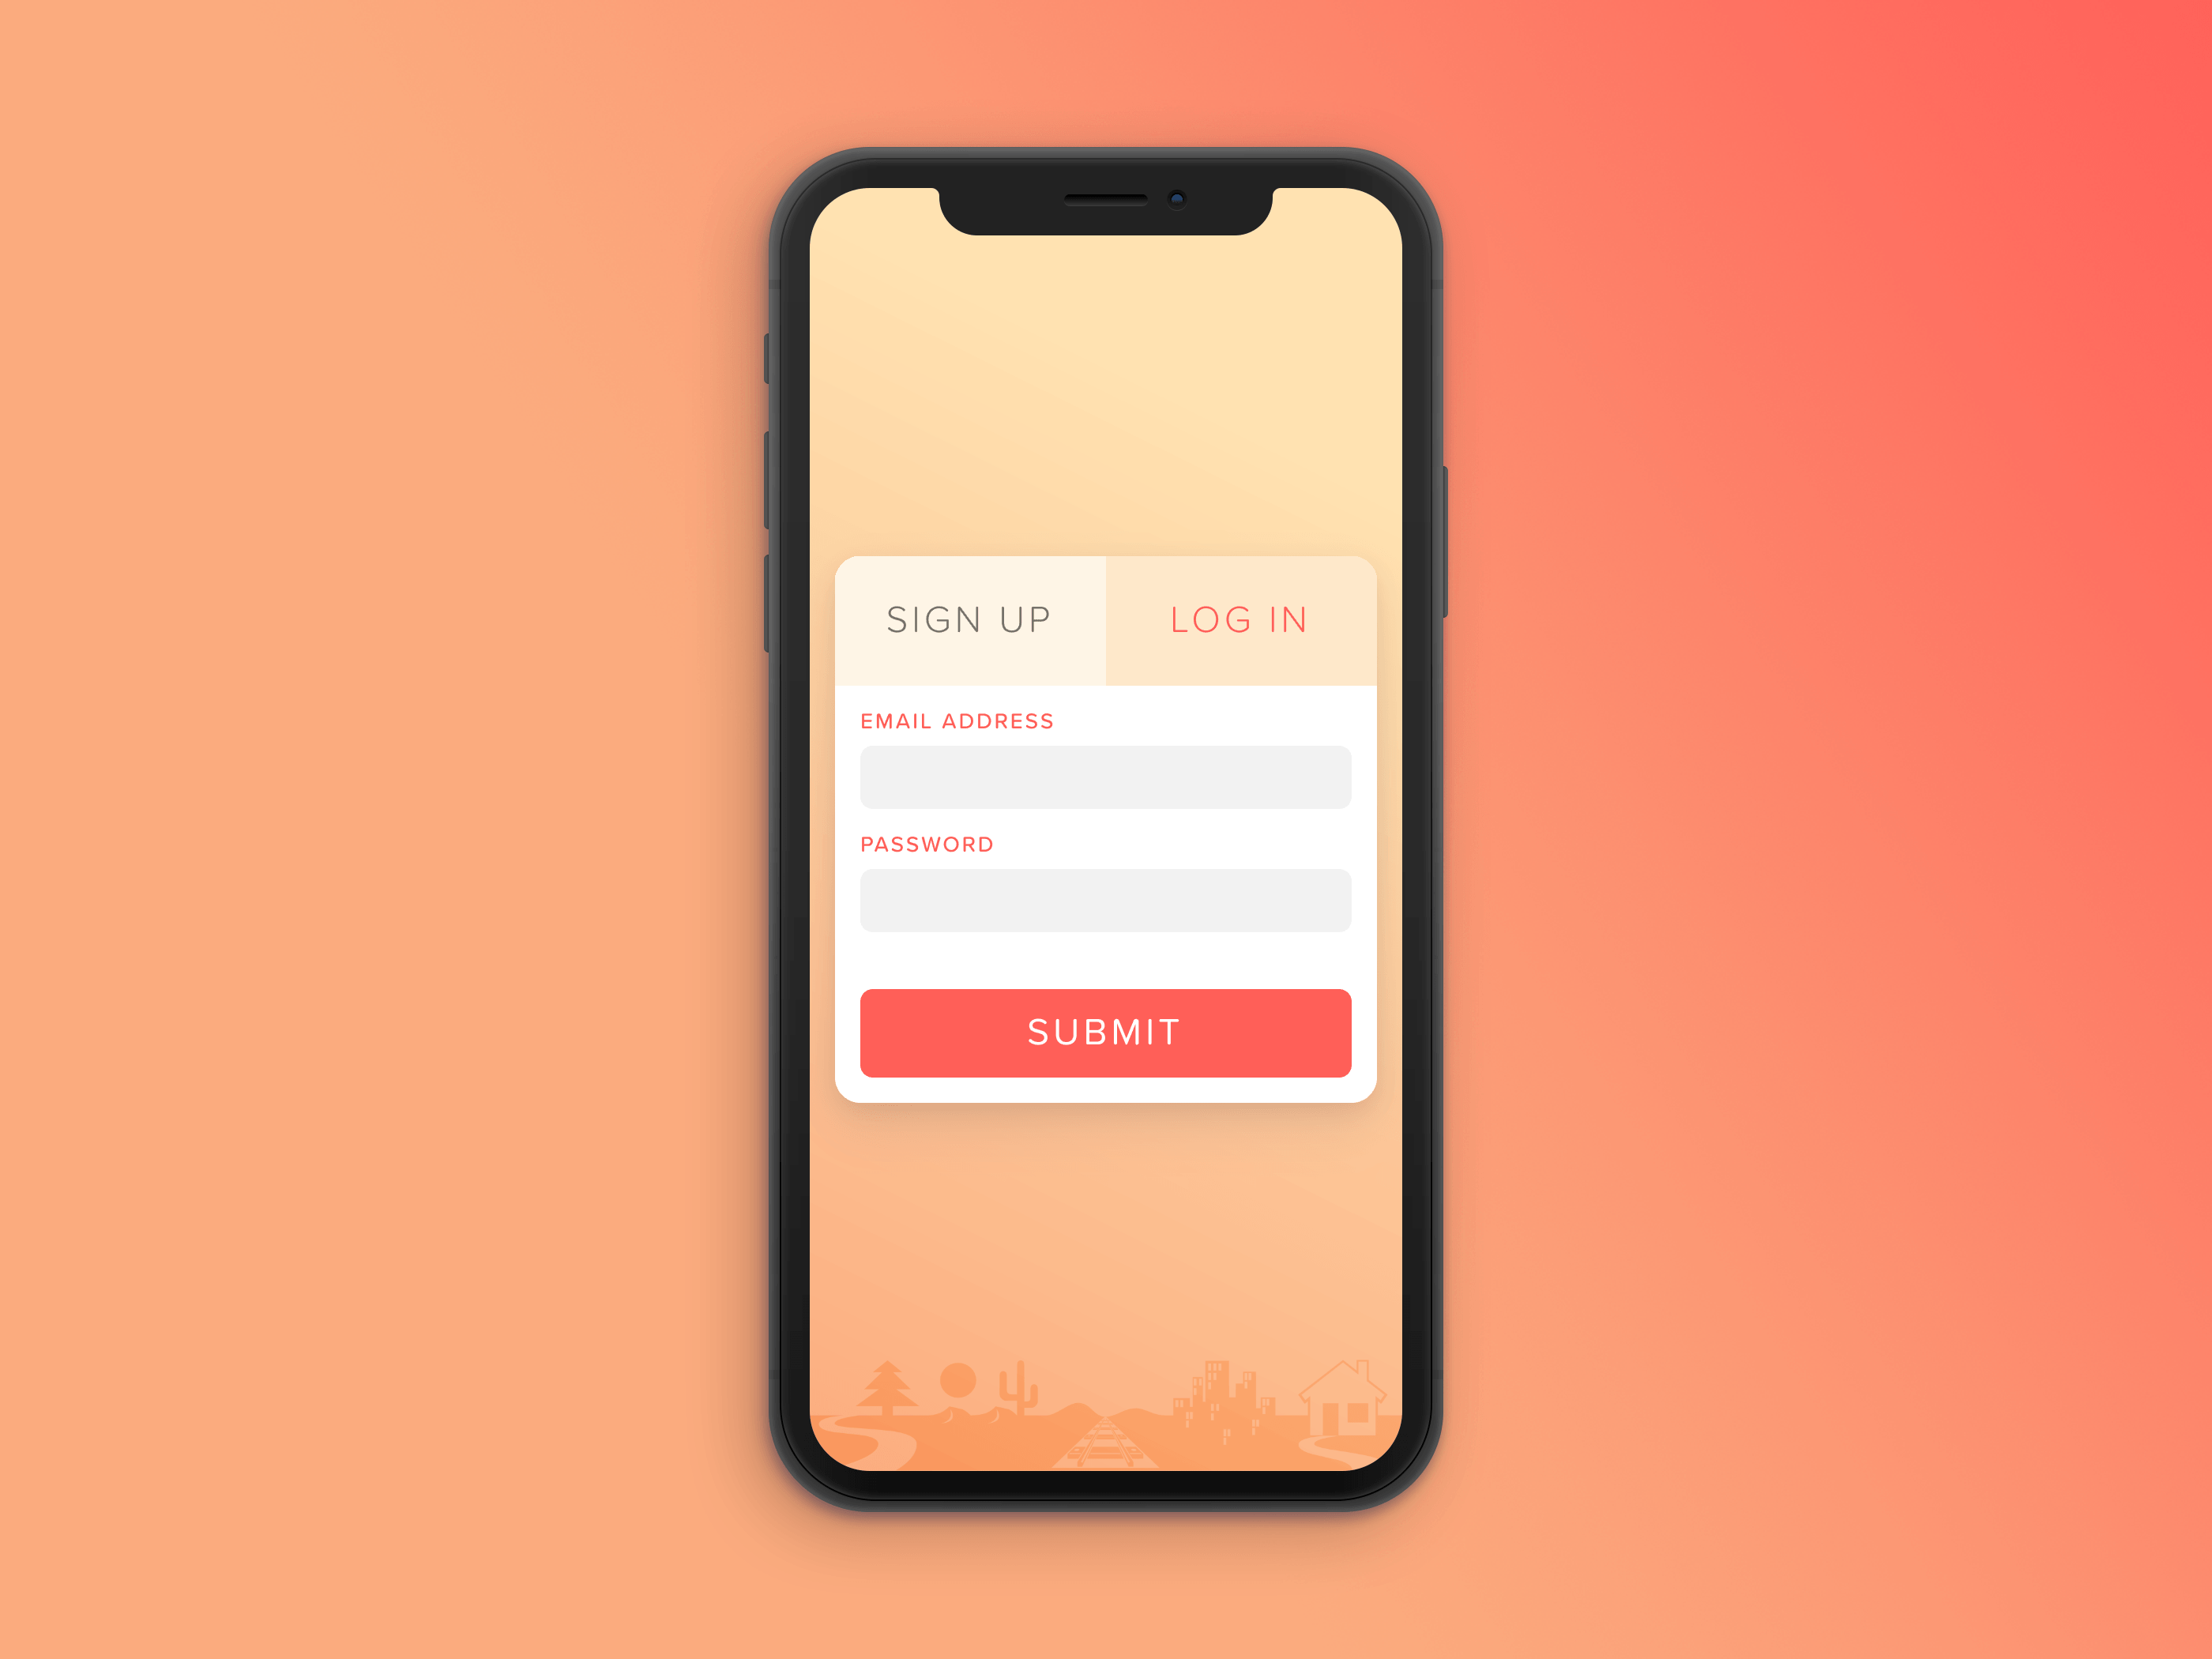 Log In screen design for iPhone X